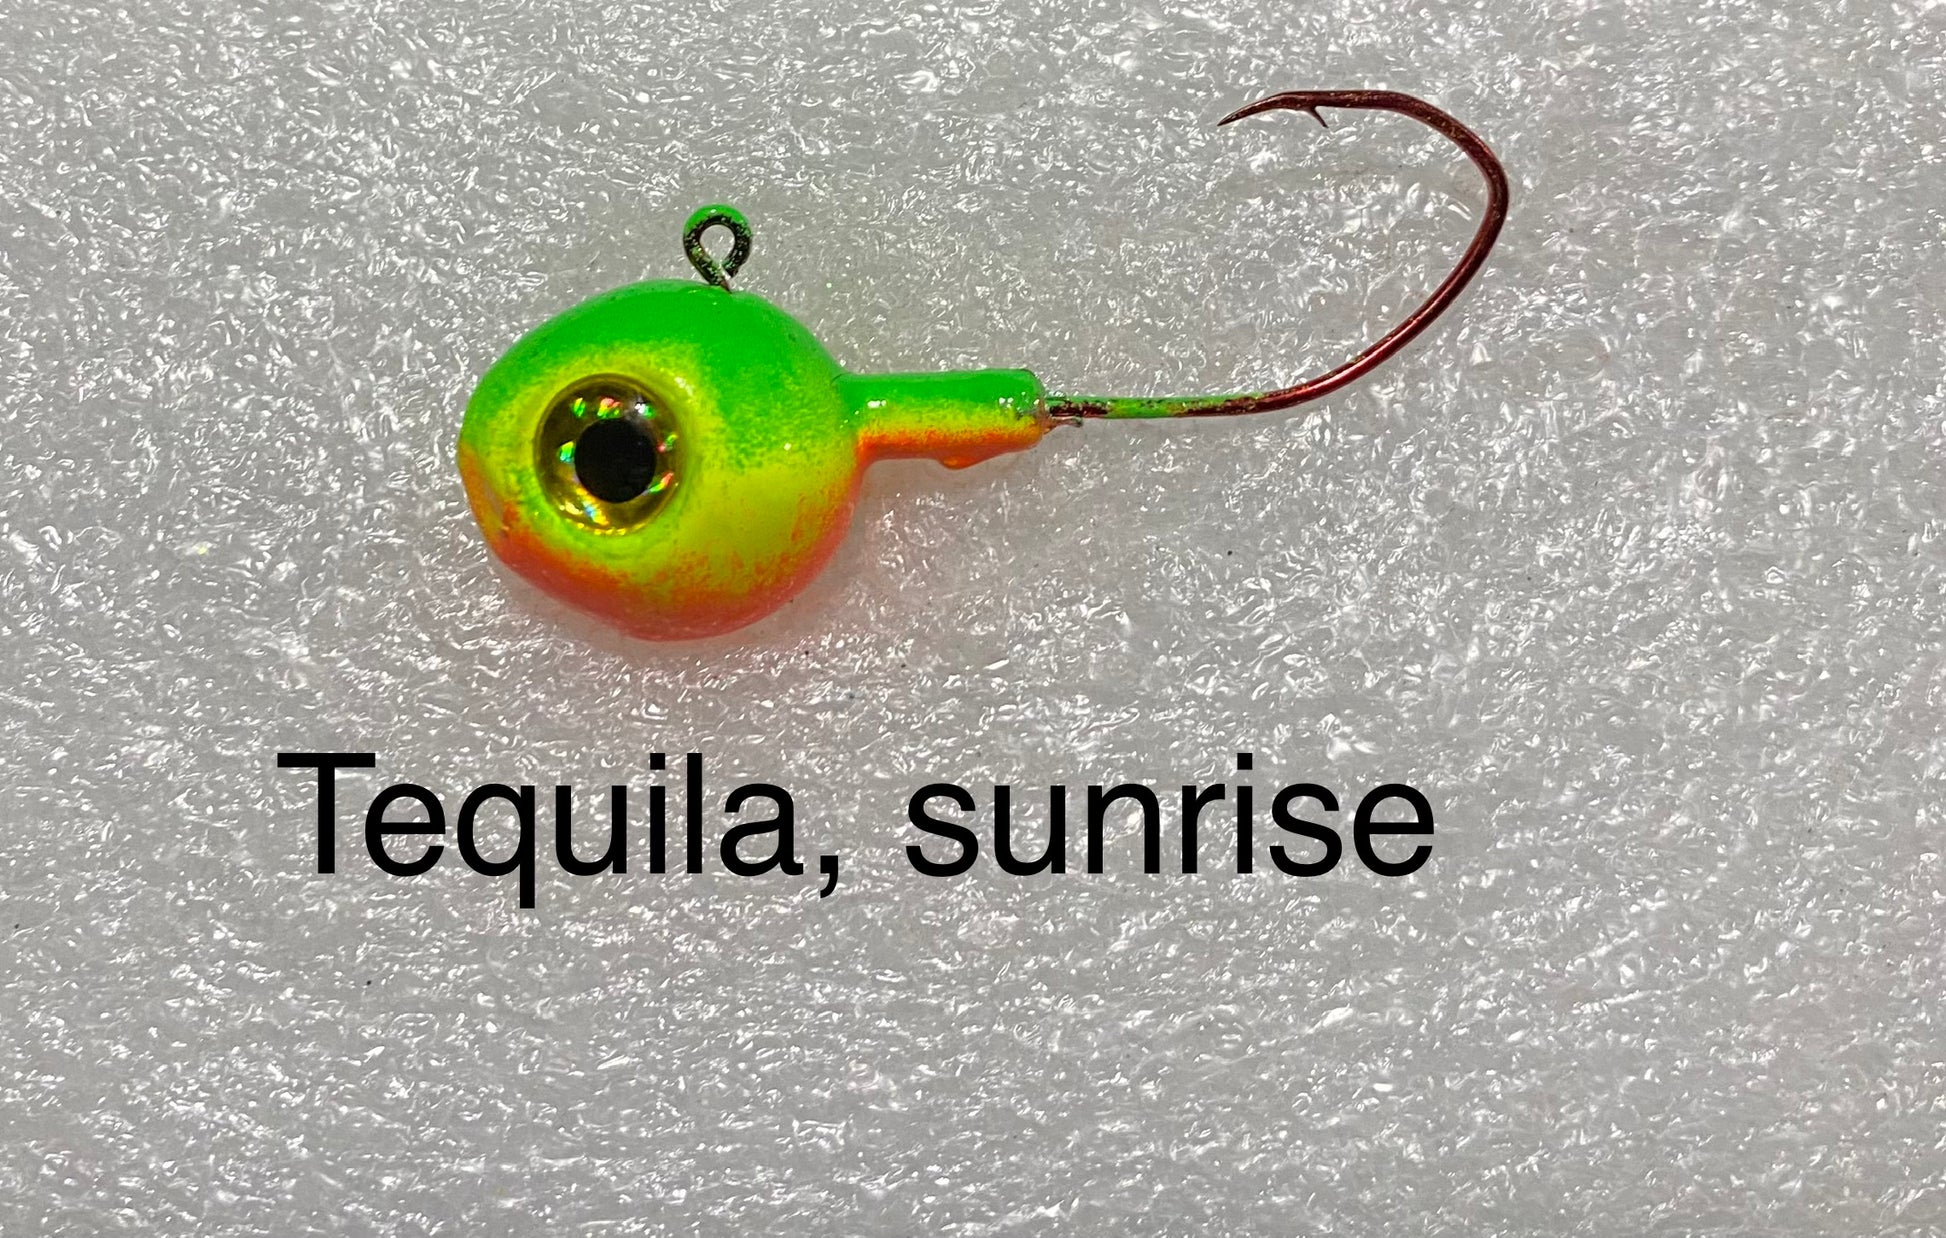 Big River Jig Heads (2 Pack) - Tequila Sunrise - 3/8 to 1 1/8 oz